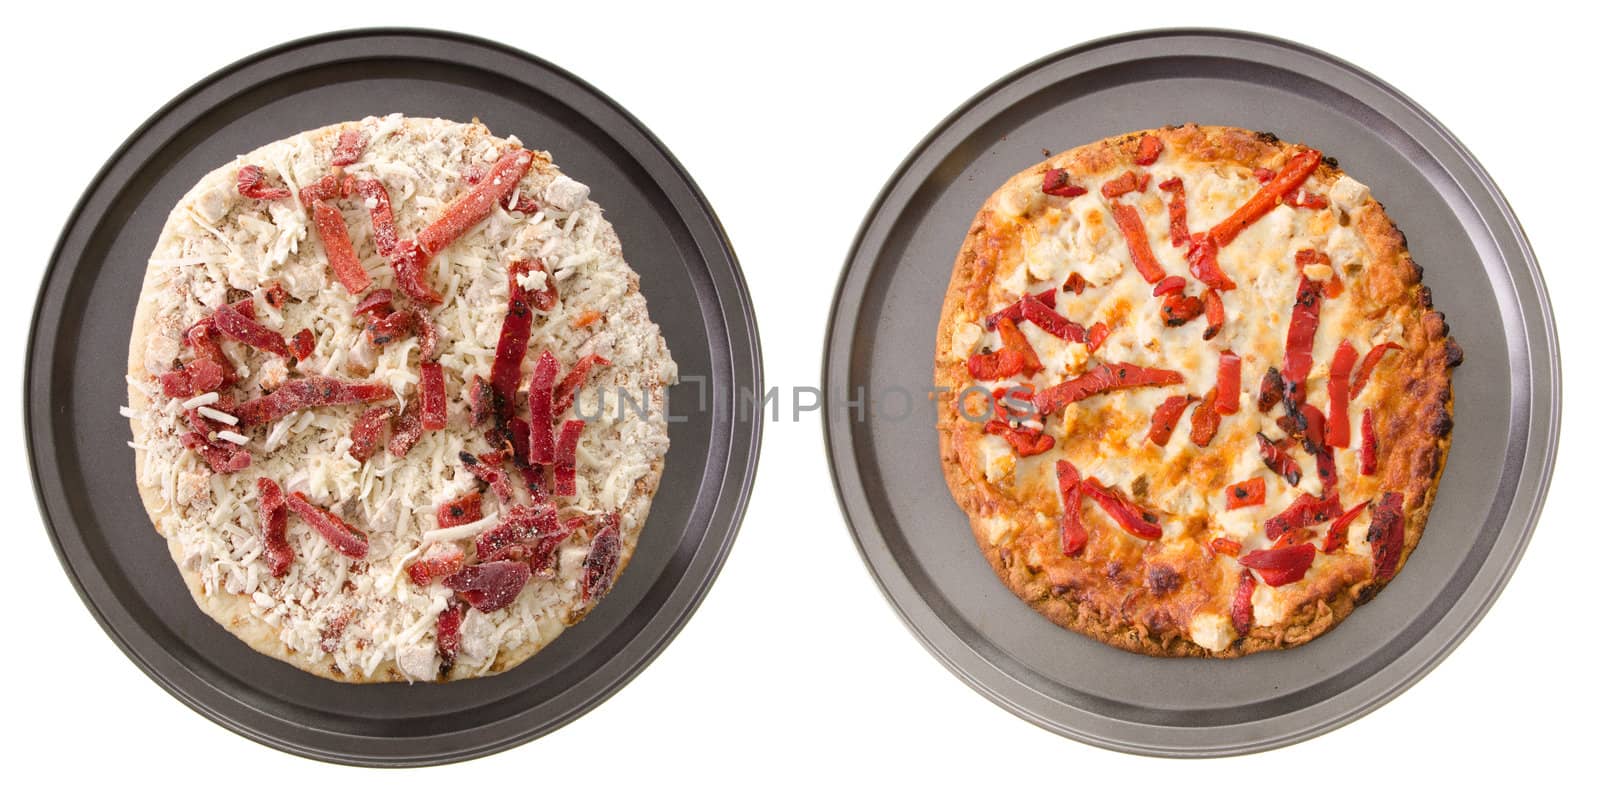 A comparison of two vegetarian pizzas, cooked and uncooked.